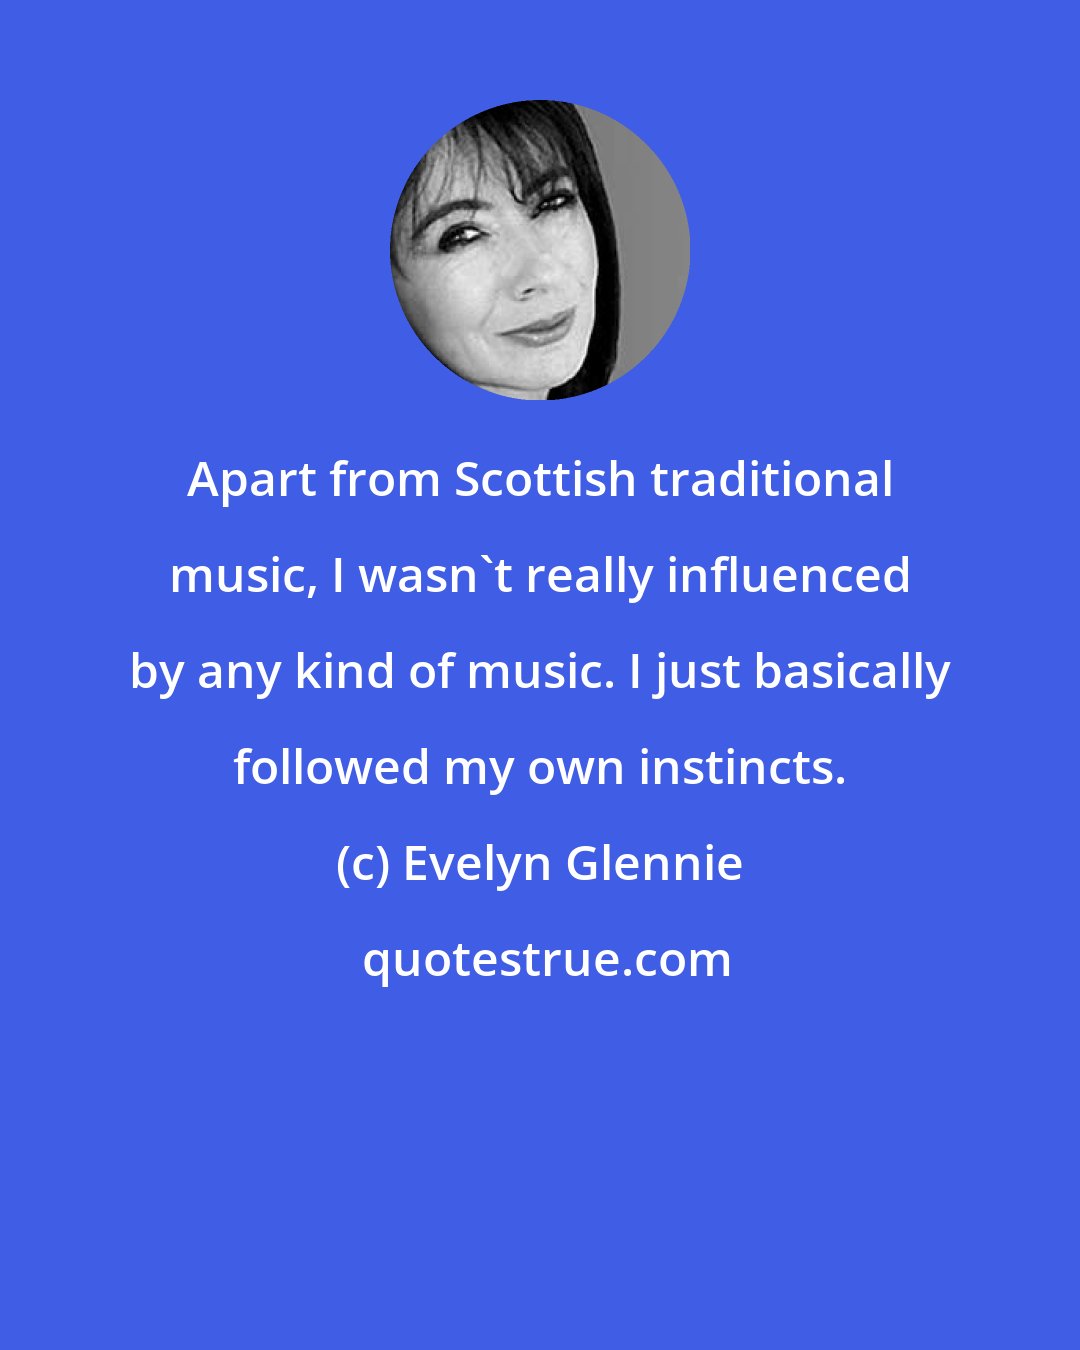 Evelyn Glennie: Apart from Scottish traditional music, I wasn't really influenced by any kind of music. I just basically followed my own instincts.